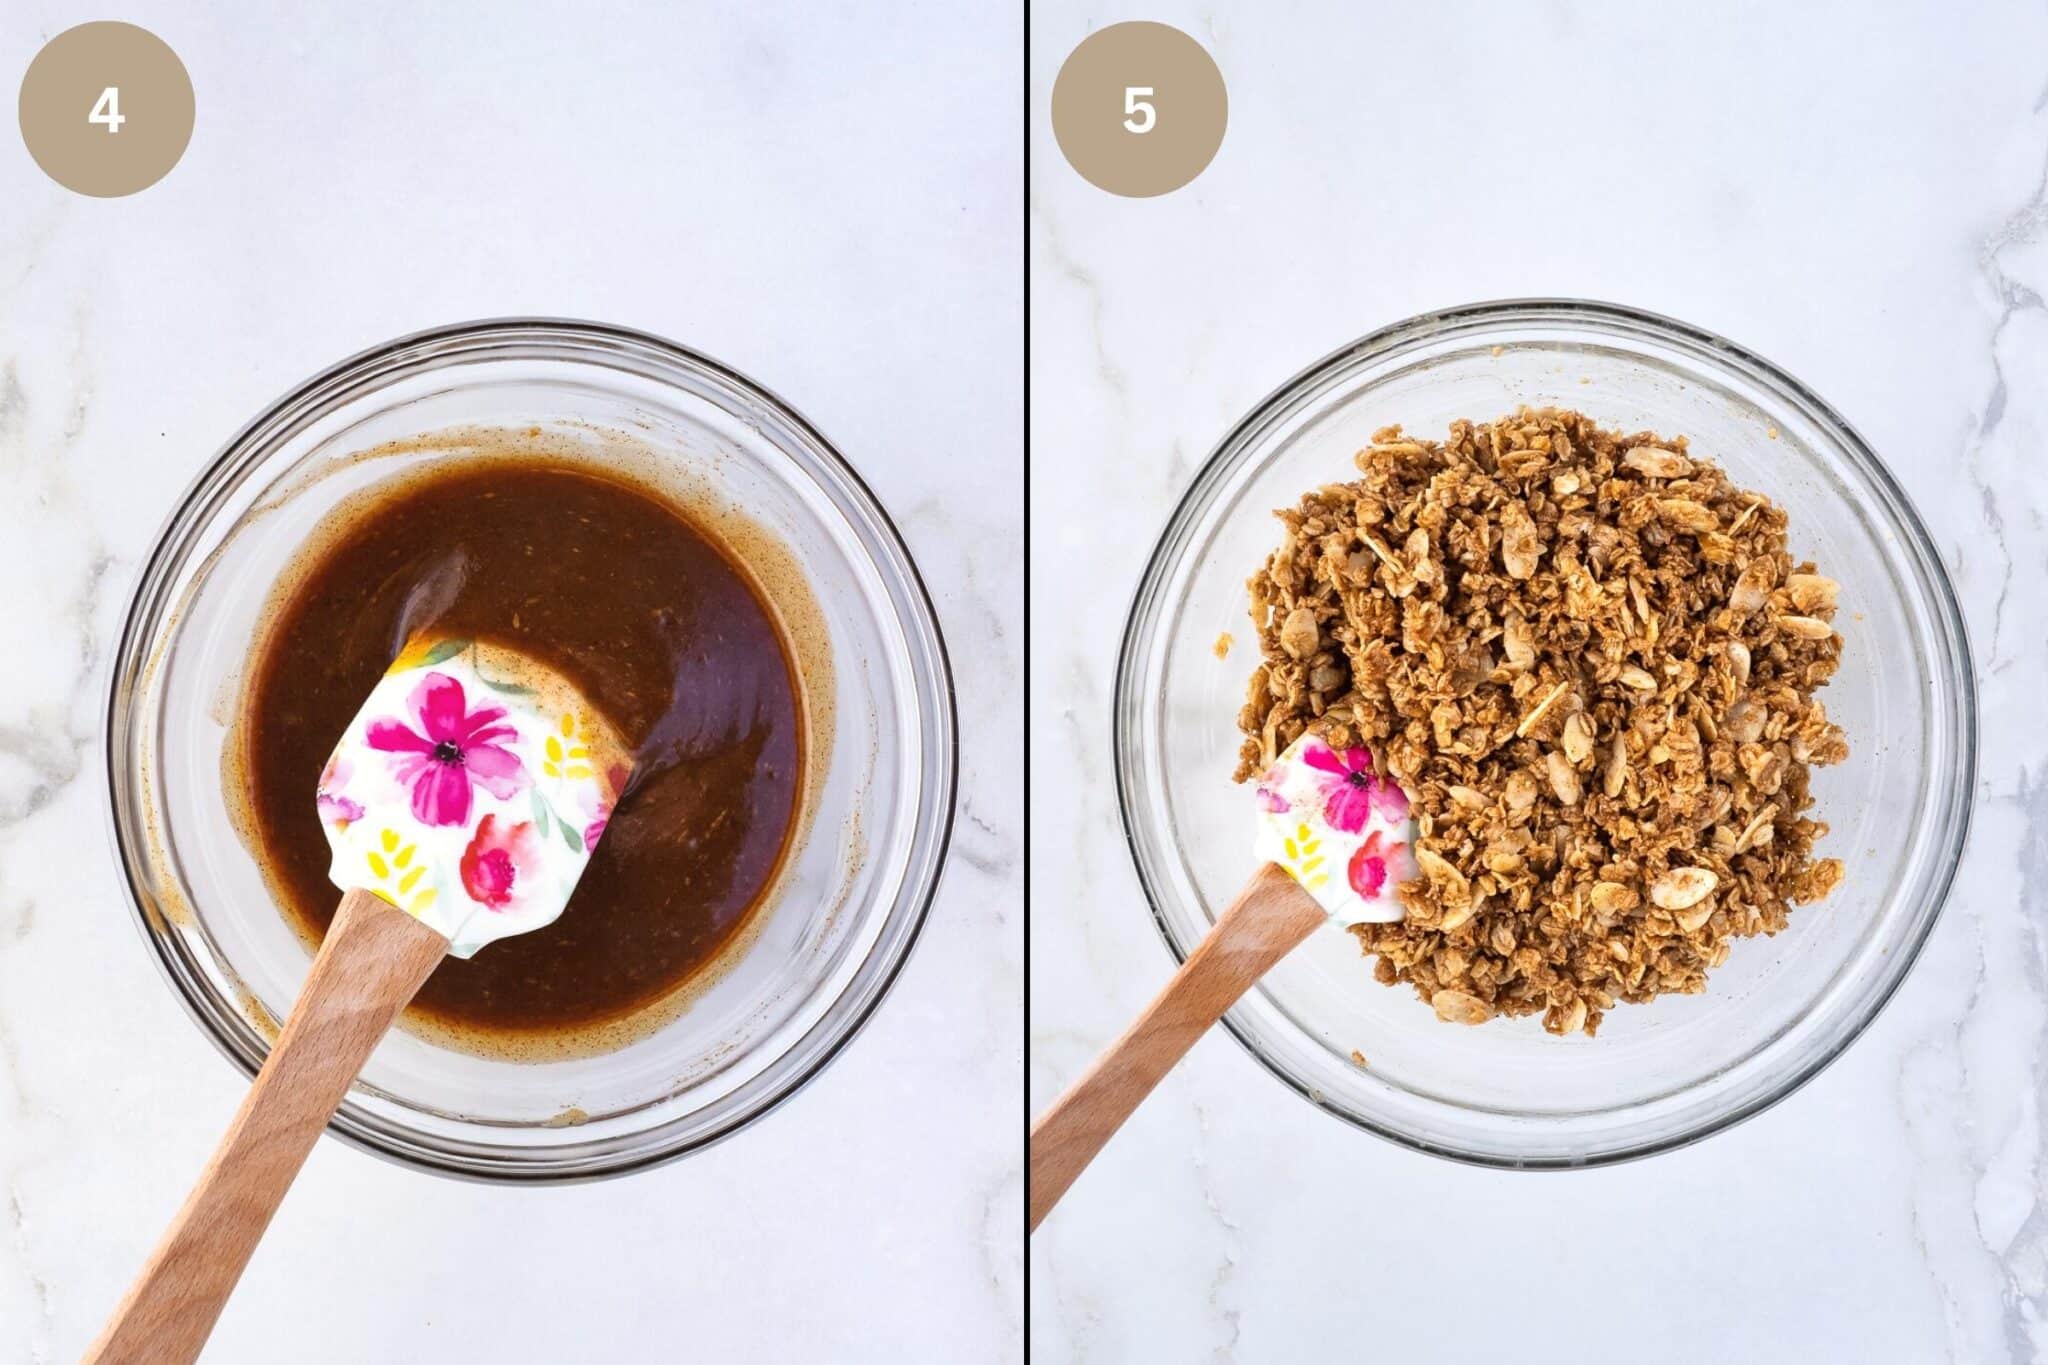 Step-by-step instructions of how to make French vanilla almond granola.